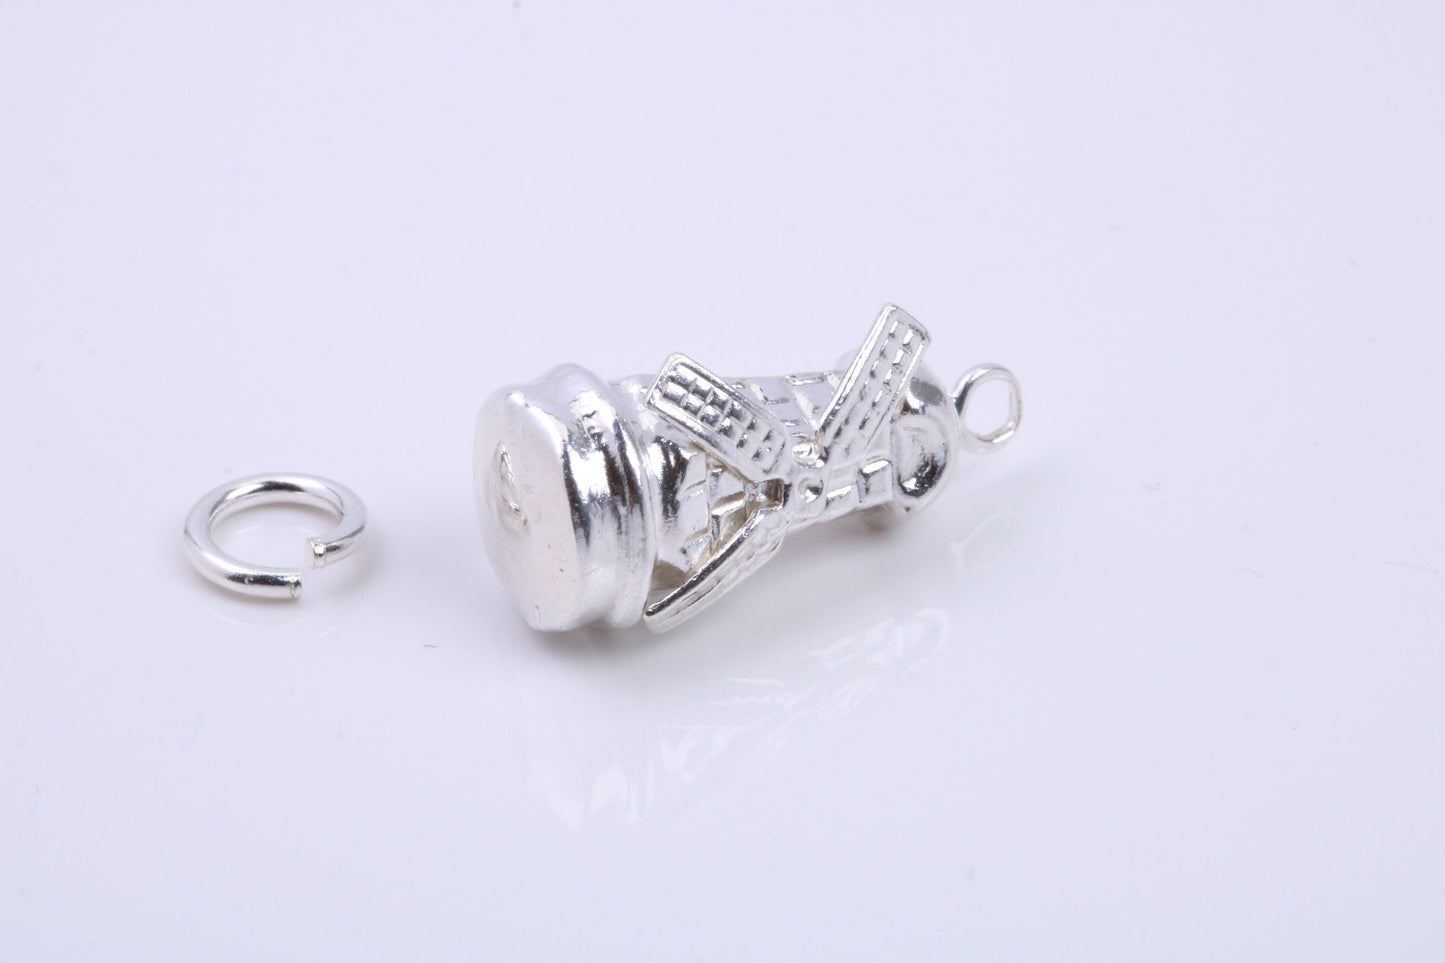 Old Disused Windmill Charm, Traditional Charm, Made from Solid 925 Grade Sterling Silver, Complete with Attachment Link